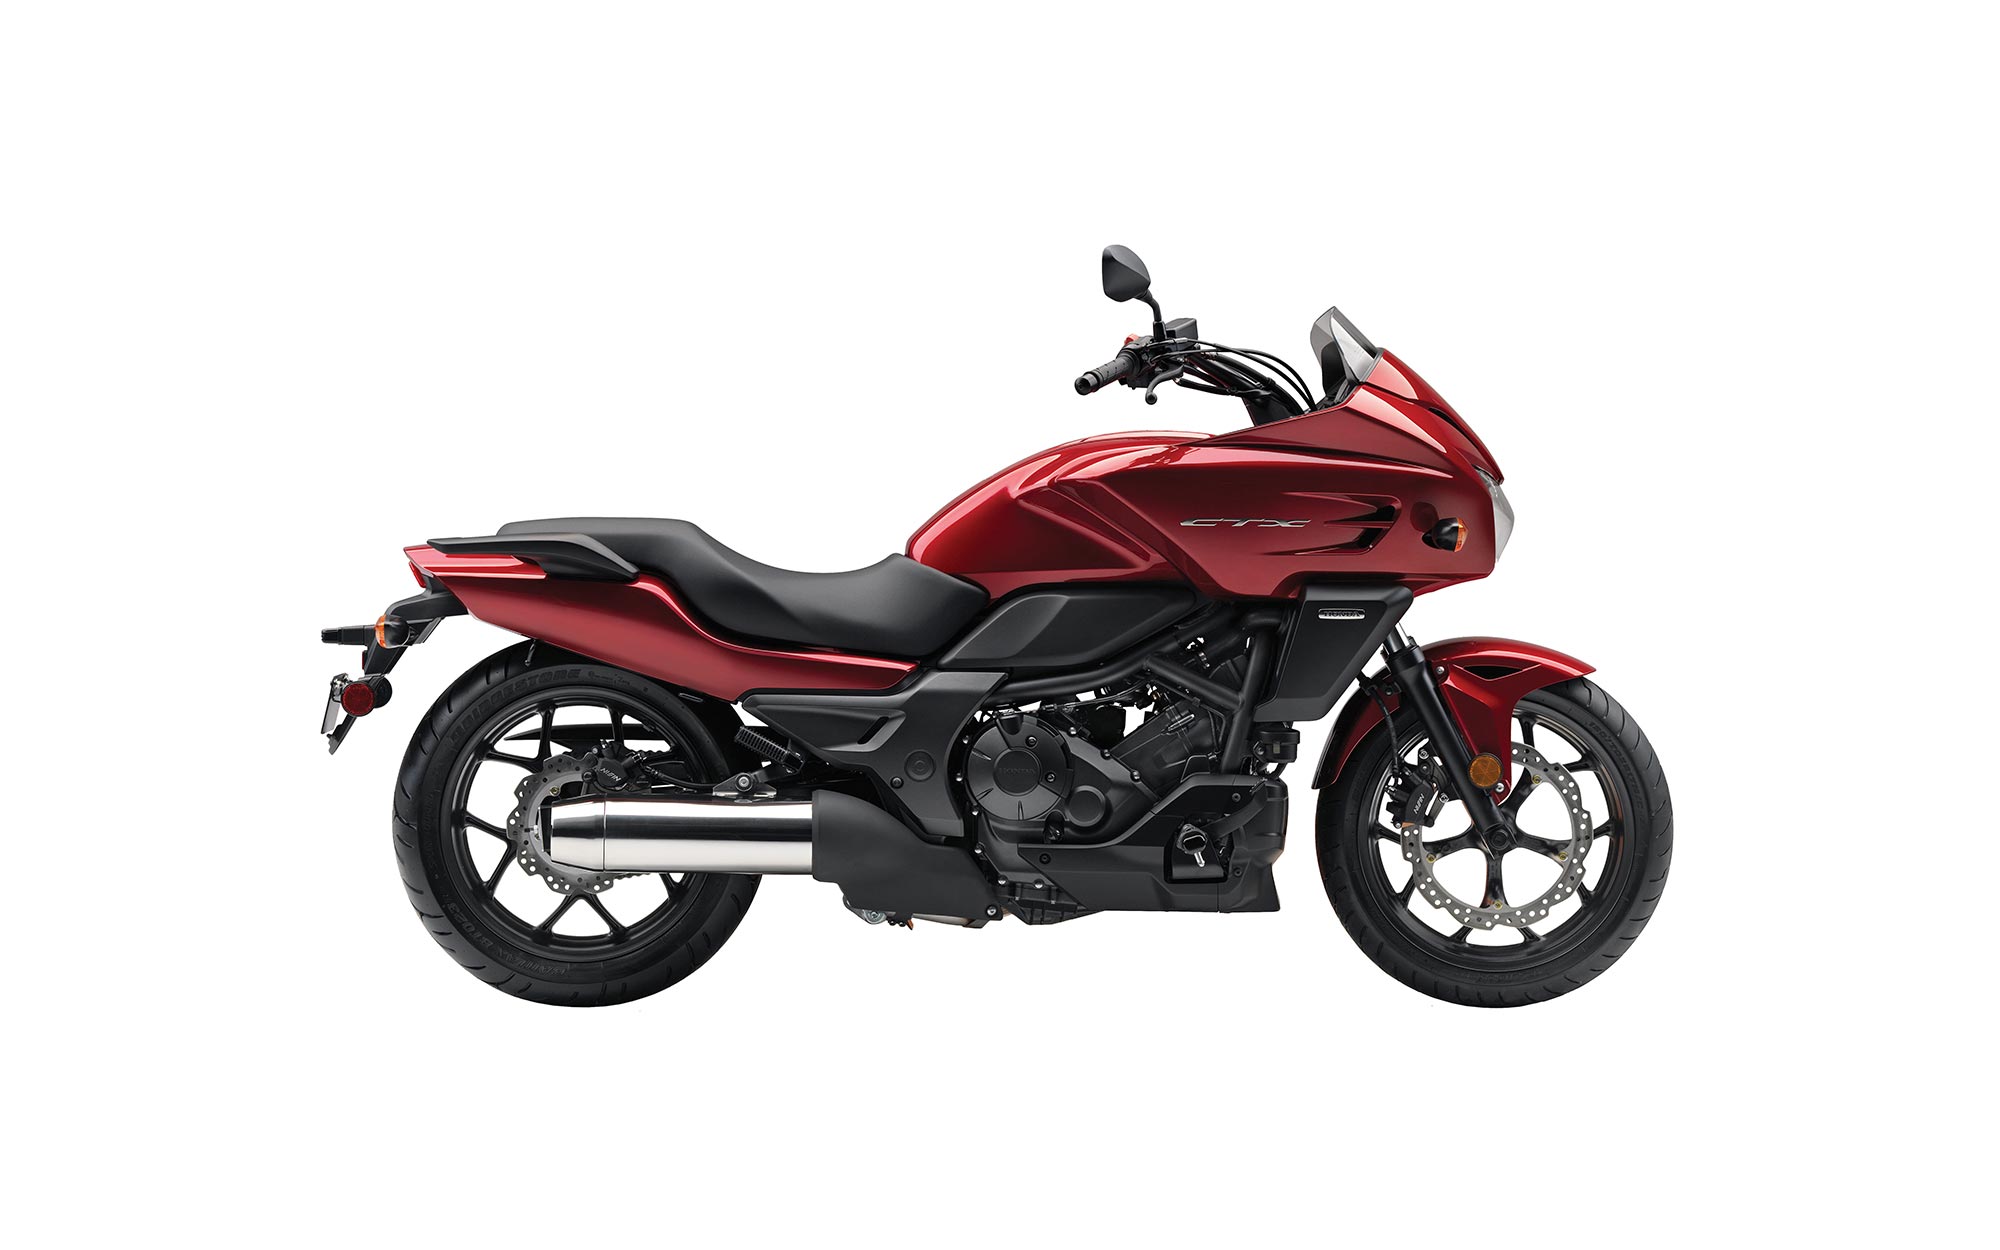 Honda's US-only CTX700s come to Europe